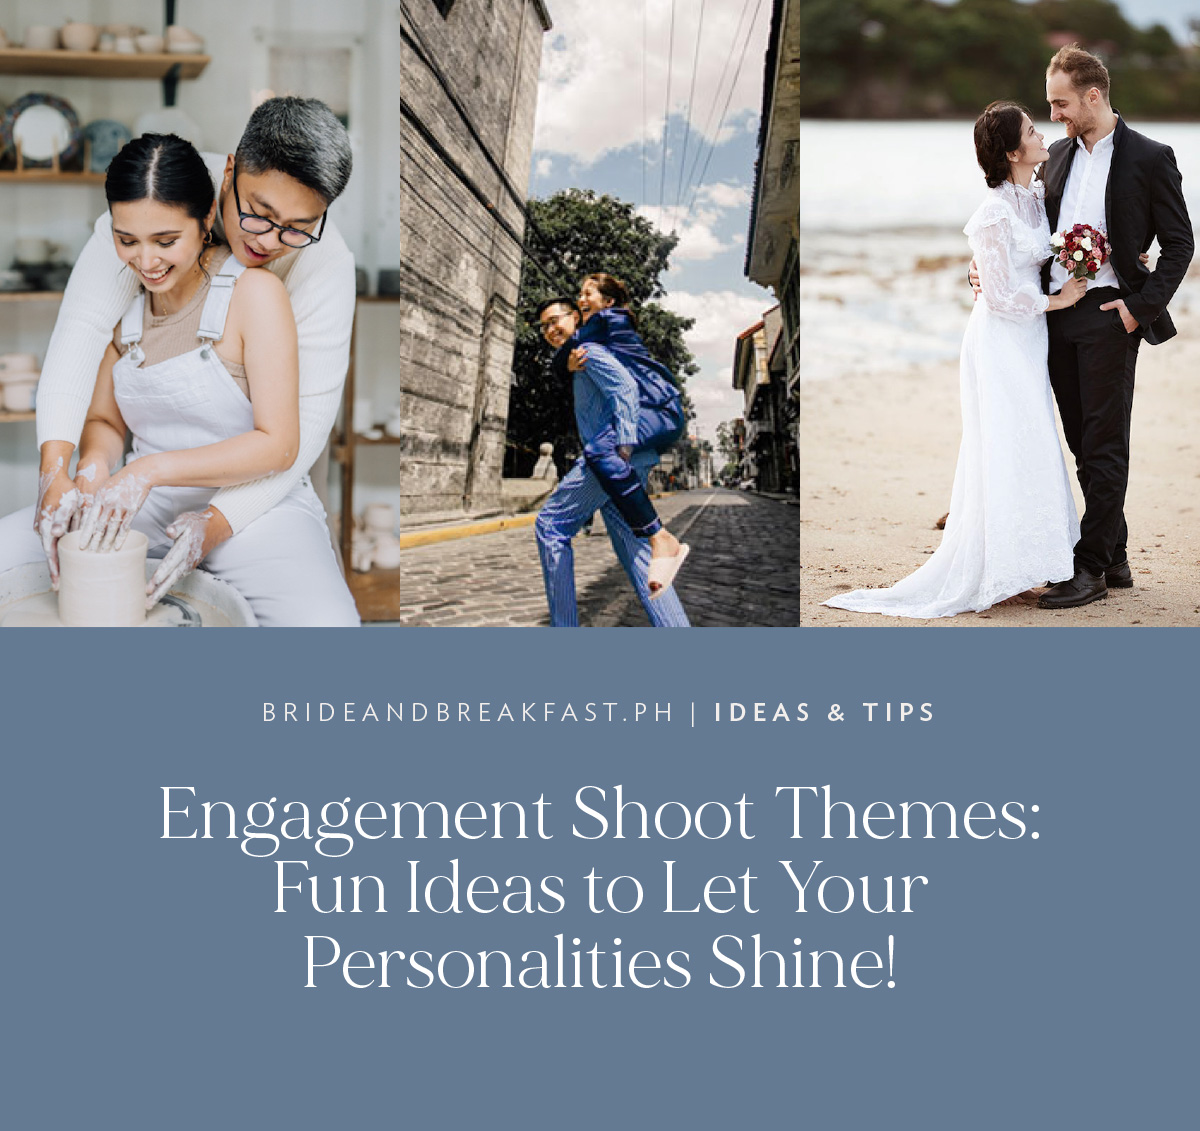 Engagement Shoot Themes: 10 Fun Ideas to Let Your Personalities Shine!